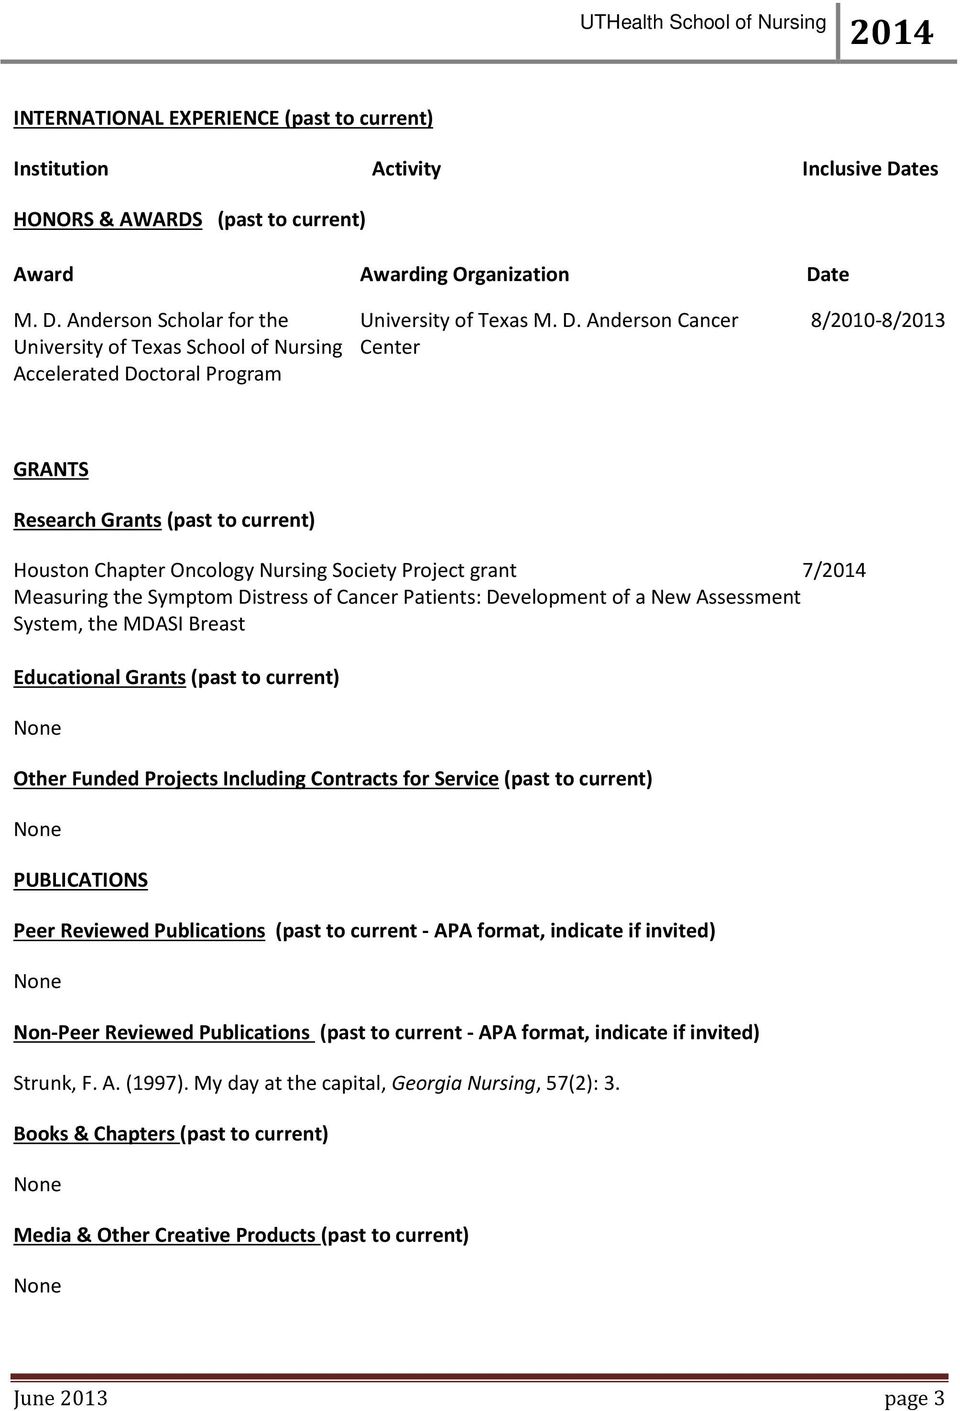 Development of a New Assessment System, the MDASI Breast Educational Grants (past to current) Other Funded Projects Including Contracts for Service (past to current) PUBLICATIONS Peer Reviewed